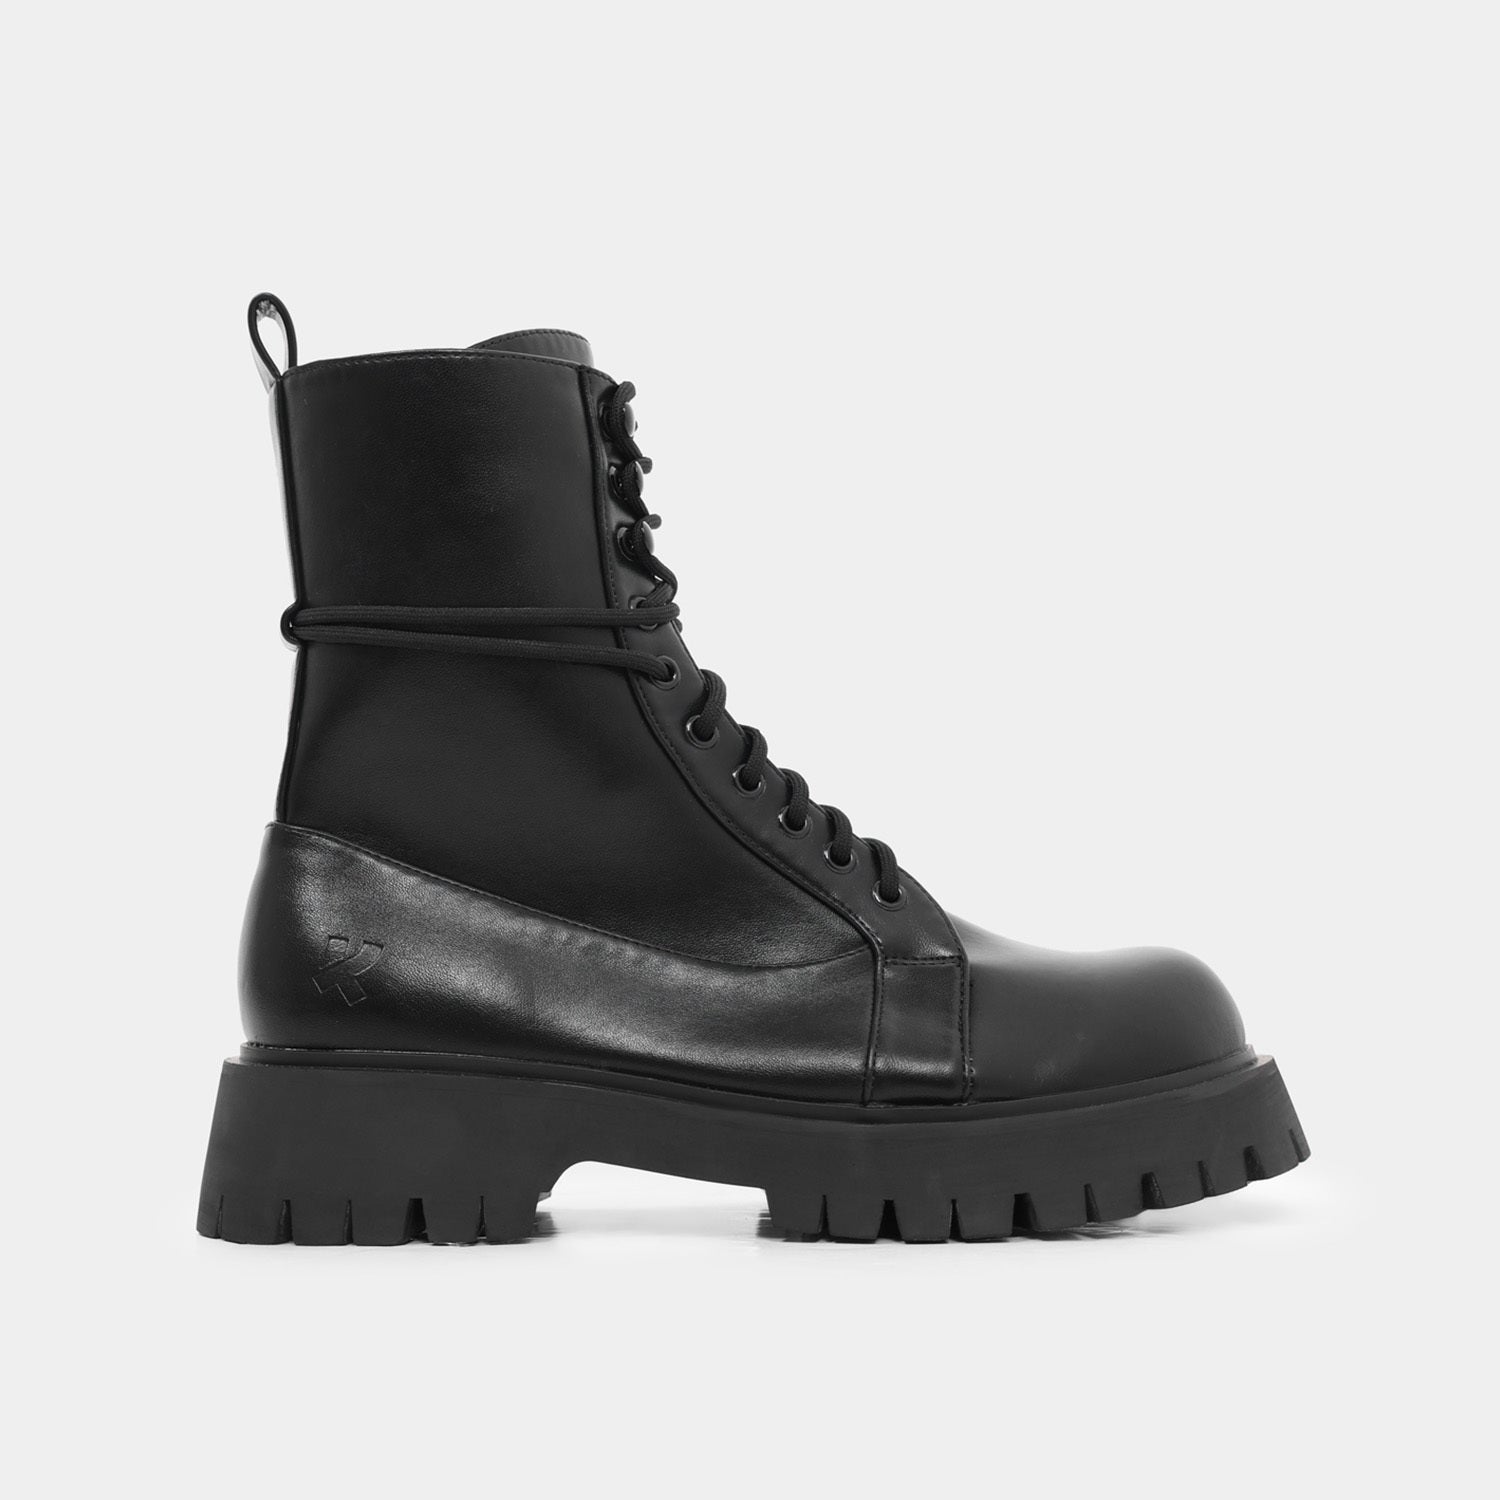 Electic Men's Military Boots - Ankle Boots - KOI Footwear - Black - Side View